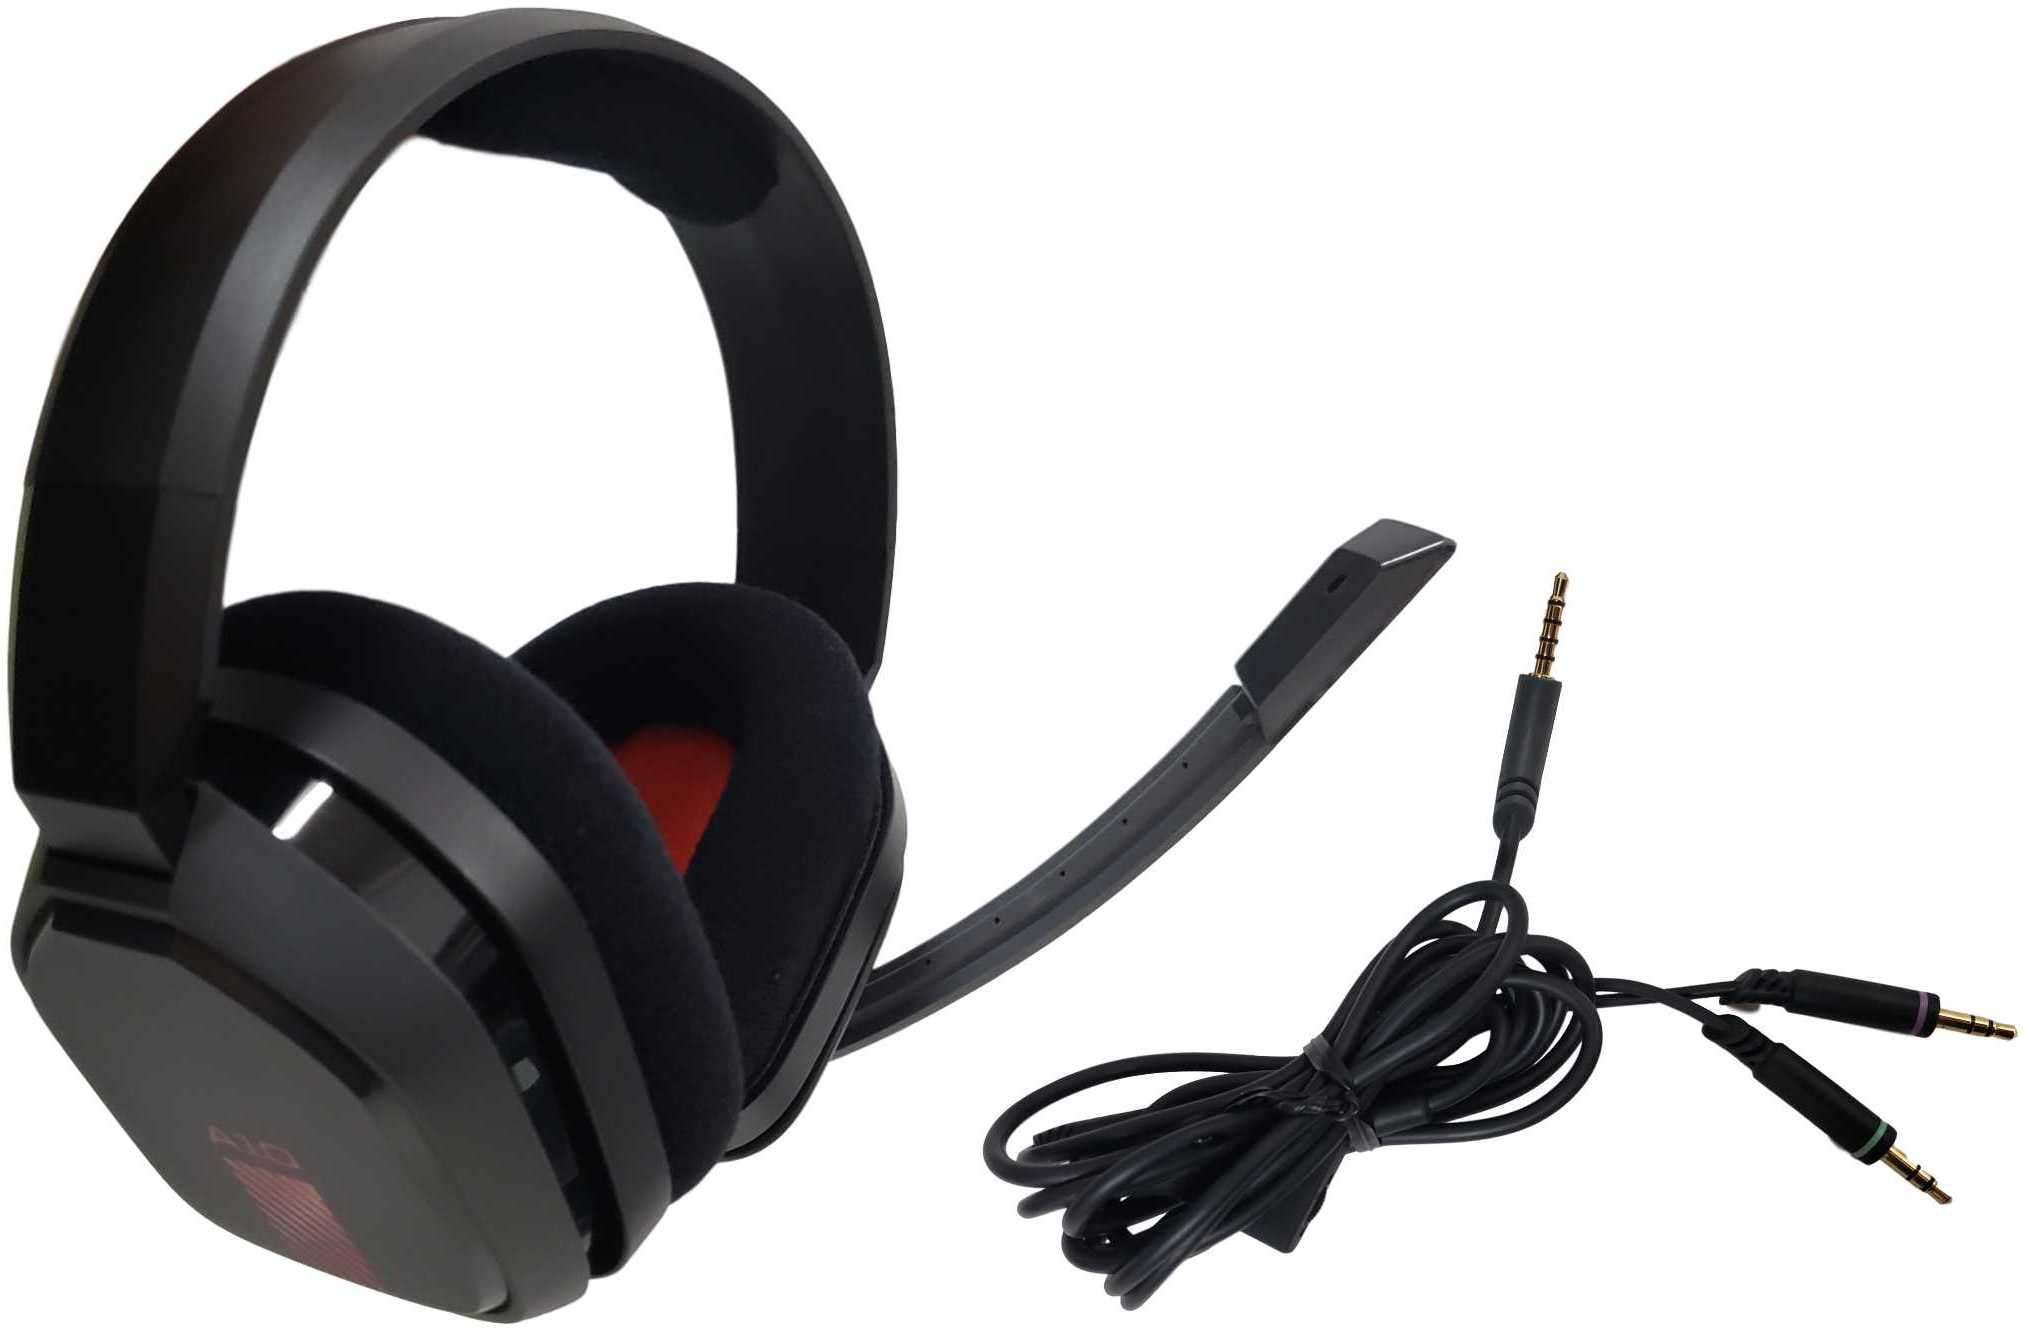 arm Integraal talent ASTRO Gaming A10 Headset for Xbox One / Nintendo Switch / PS4 / PC and Mac  - Wired 3.5mm and Boom Mic by Logitech - Gray/Red - Bulk Packaging -  Walmart.com